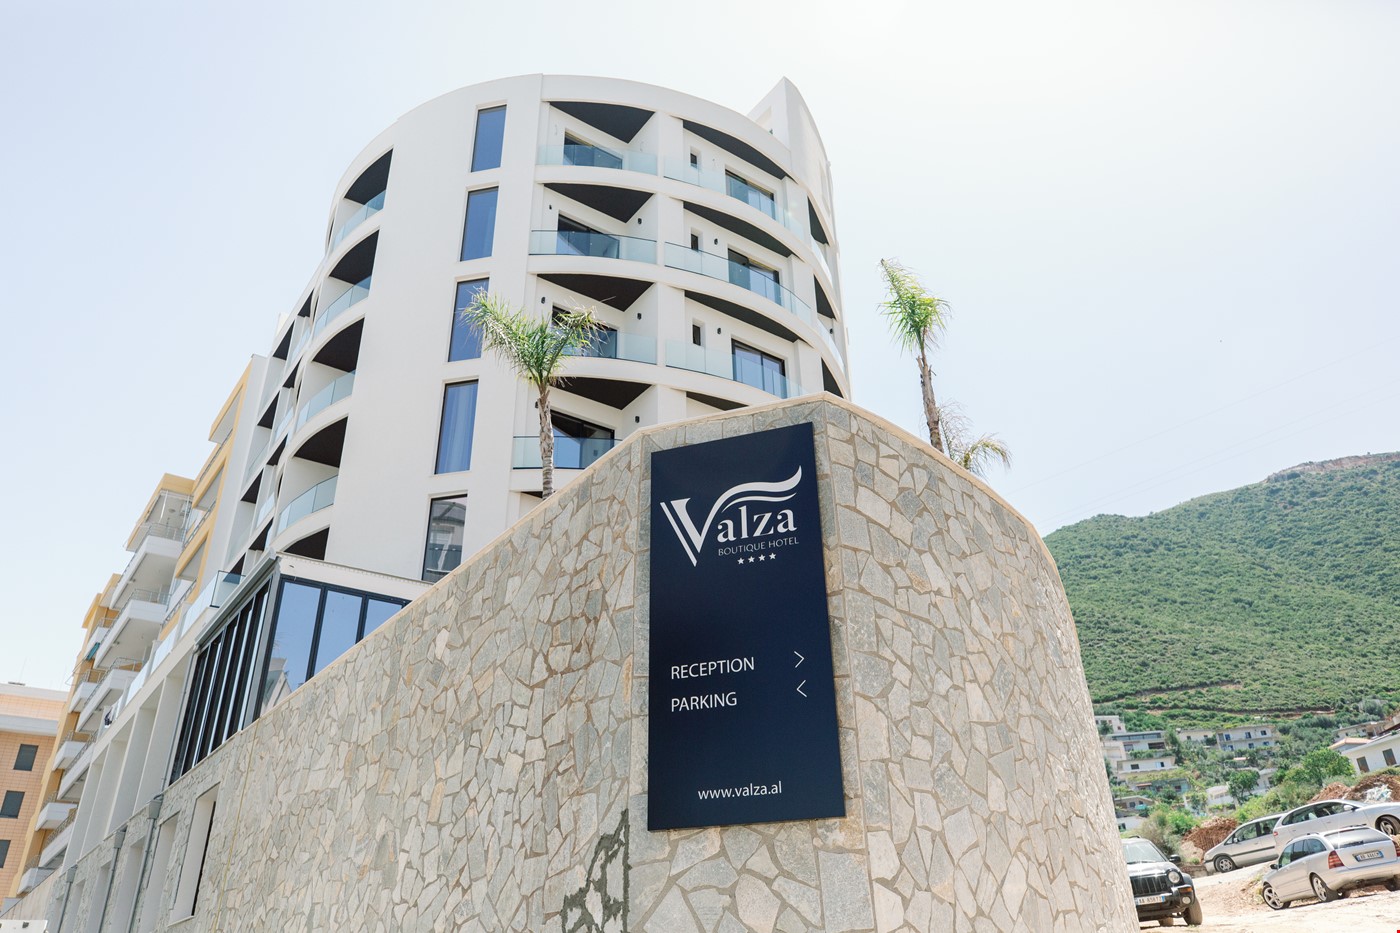 Hotel Vlore Albania nomad remote 56e5d9f2-4206-4b03-8854-aacf61ee5823_ValzaBoutiqueHotel1.jpg